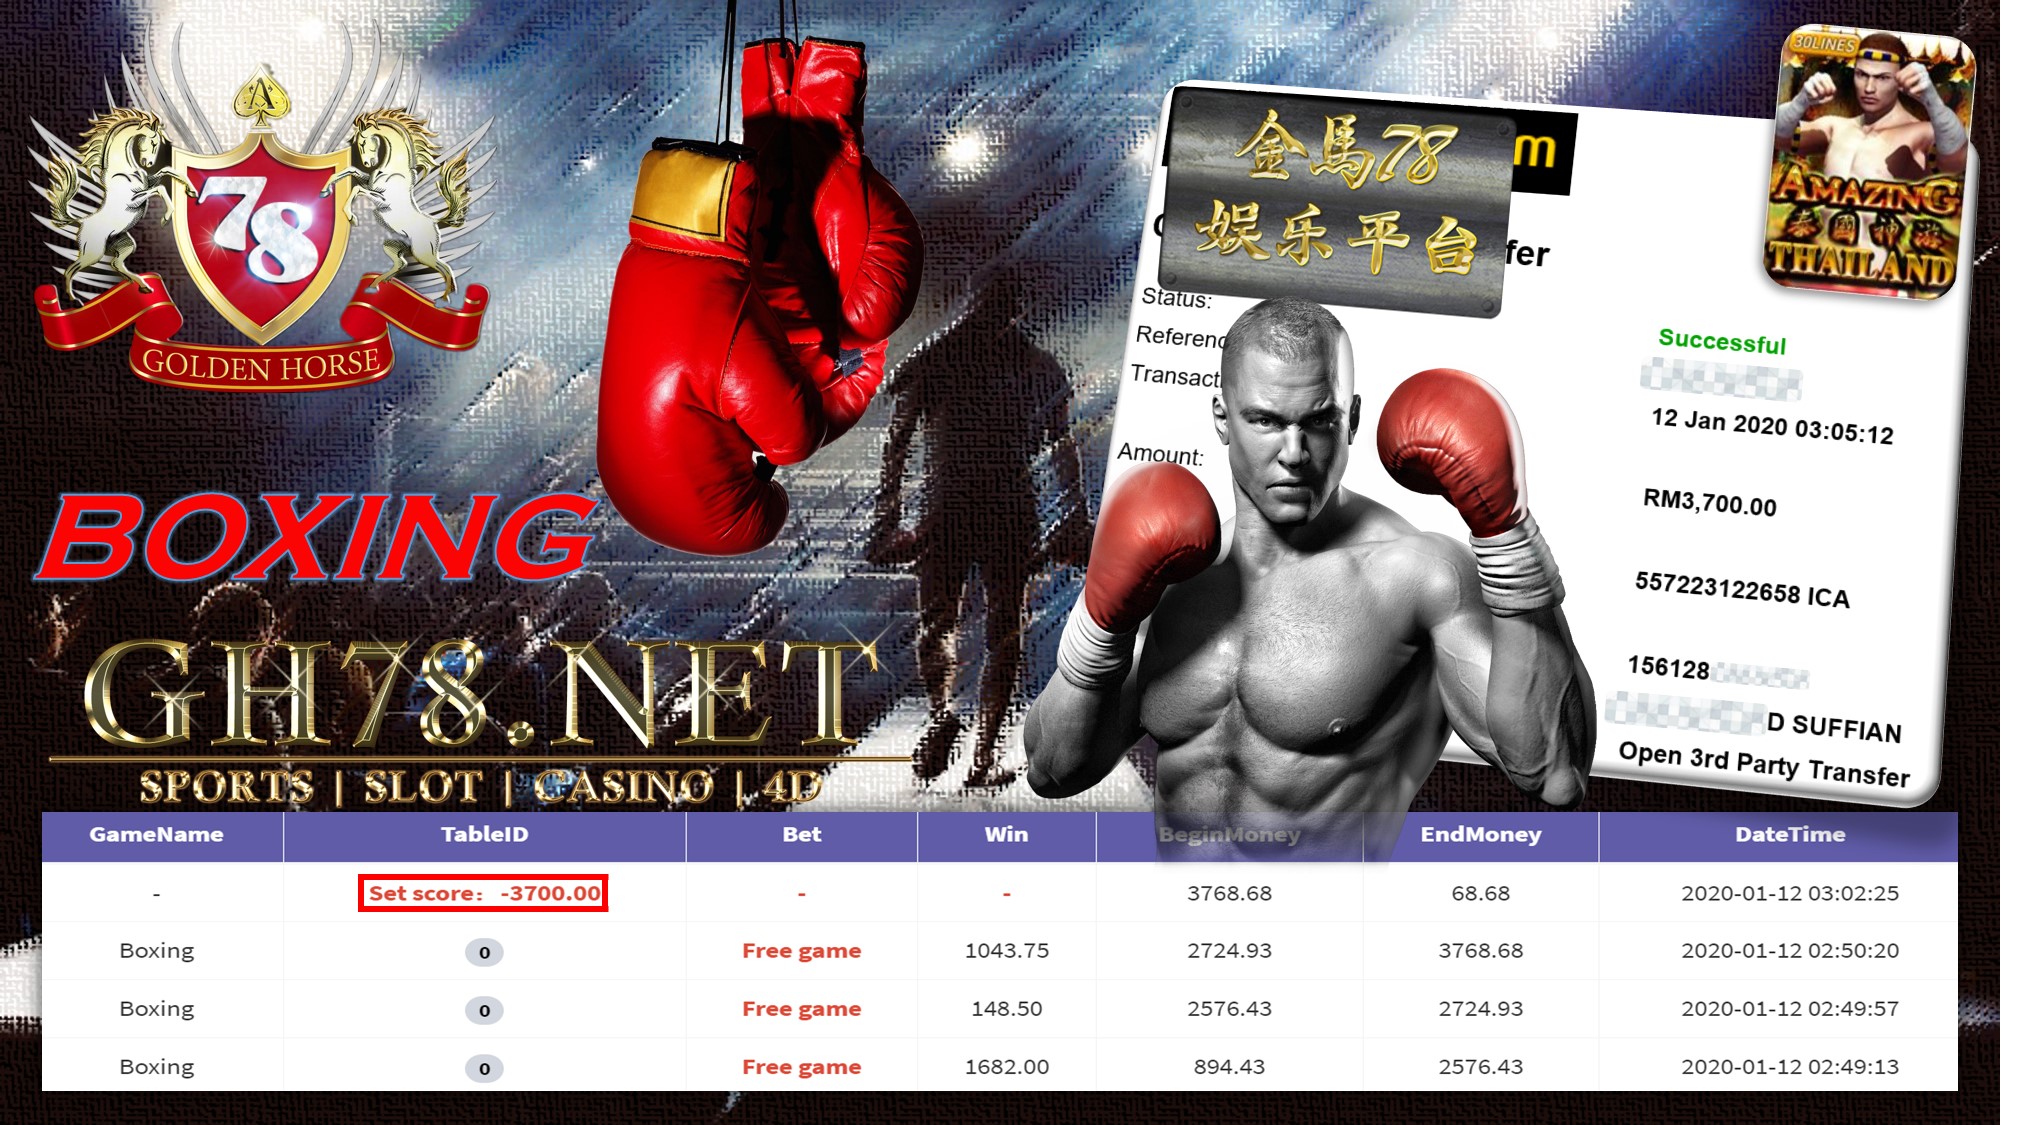 2020 NEW YEAR !!! MEMBER MAIN 918KISS FT.BOXING WITHDRAW RM3700 !!!